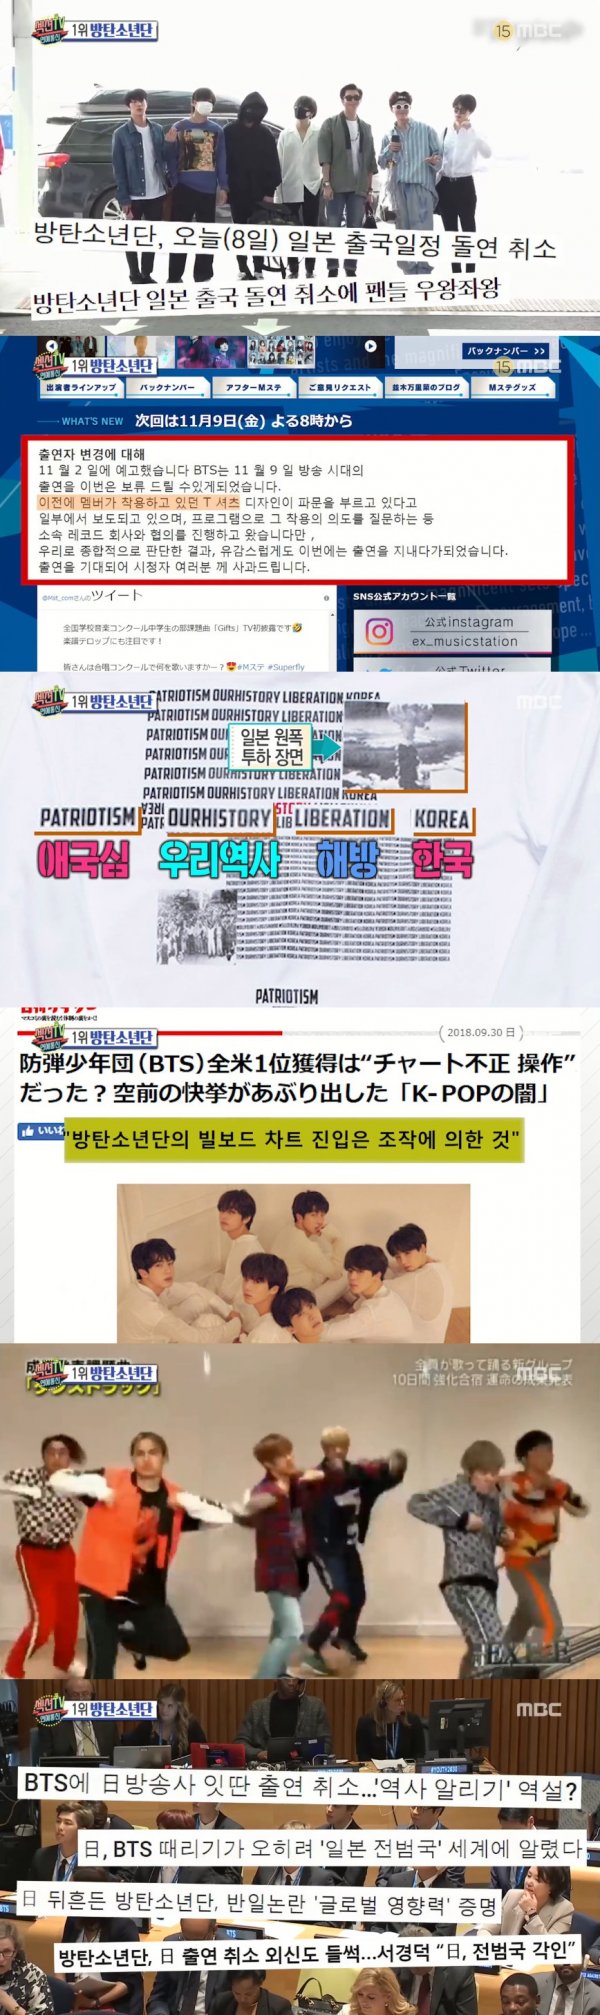 News of the group BTS cancellation of the appearance of Japan broadcast was reported through Section TV Entertainment Communication.On the afternoon of the 12th, MBC entertainment information program Section TV Entertainment Communication (hereinafter referred to as Section TV) drew news of BTS, which was recently canceled on Japan.Broadcaster, who was scheduled to appear at BTS, said, I asked for the intention of wearing the clothes and decided to postpone the appearance as a result of comprehensive judgment.In addition, Japan has once again reexamined the disparaging of BTS.The clothes that Jimin wore in the past became a problem. It also controversially wrote RM on Liberation Day.Japan also criticized the Billboards chart entry as chart falsify by fans.